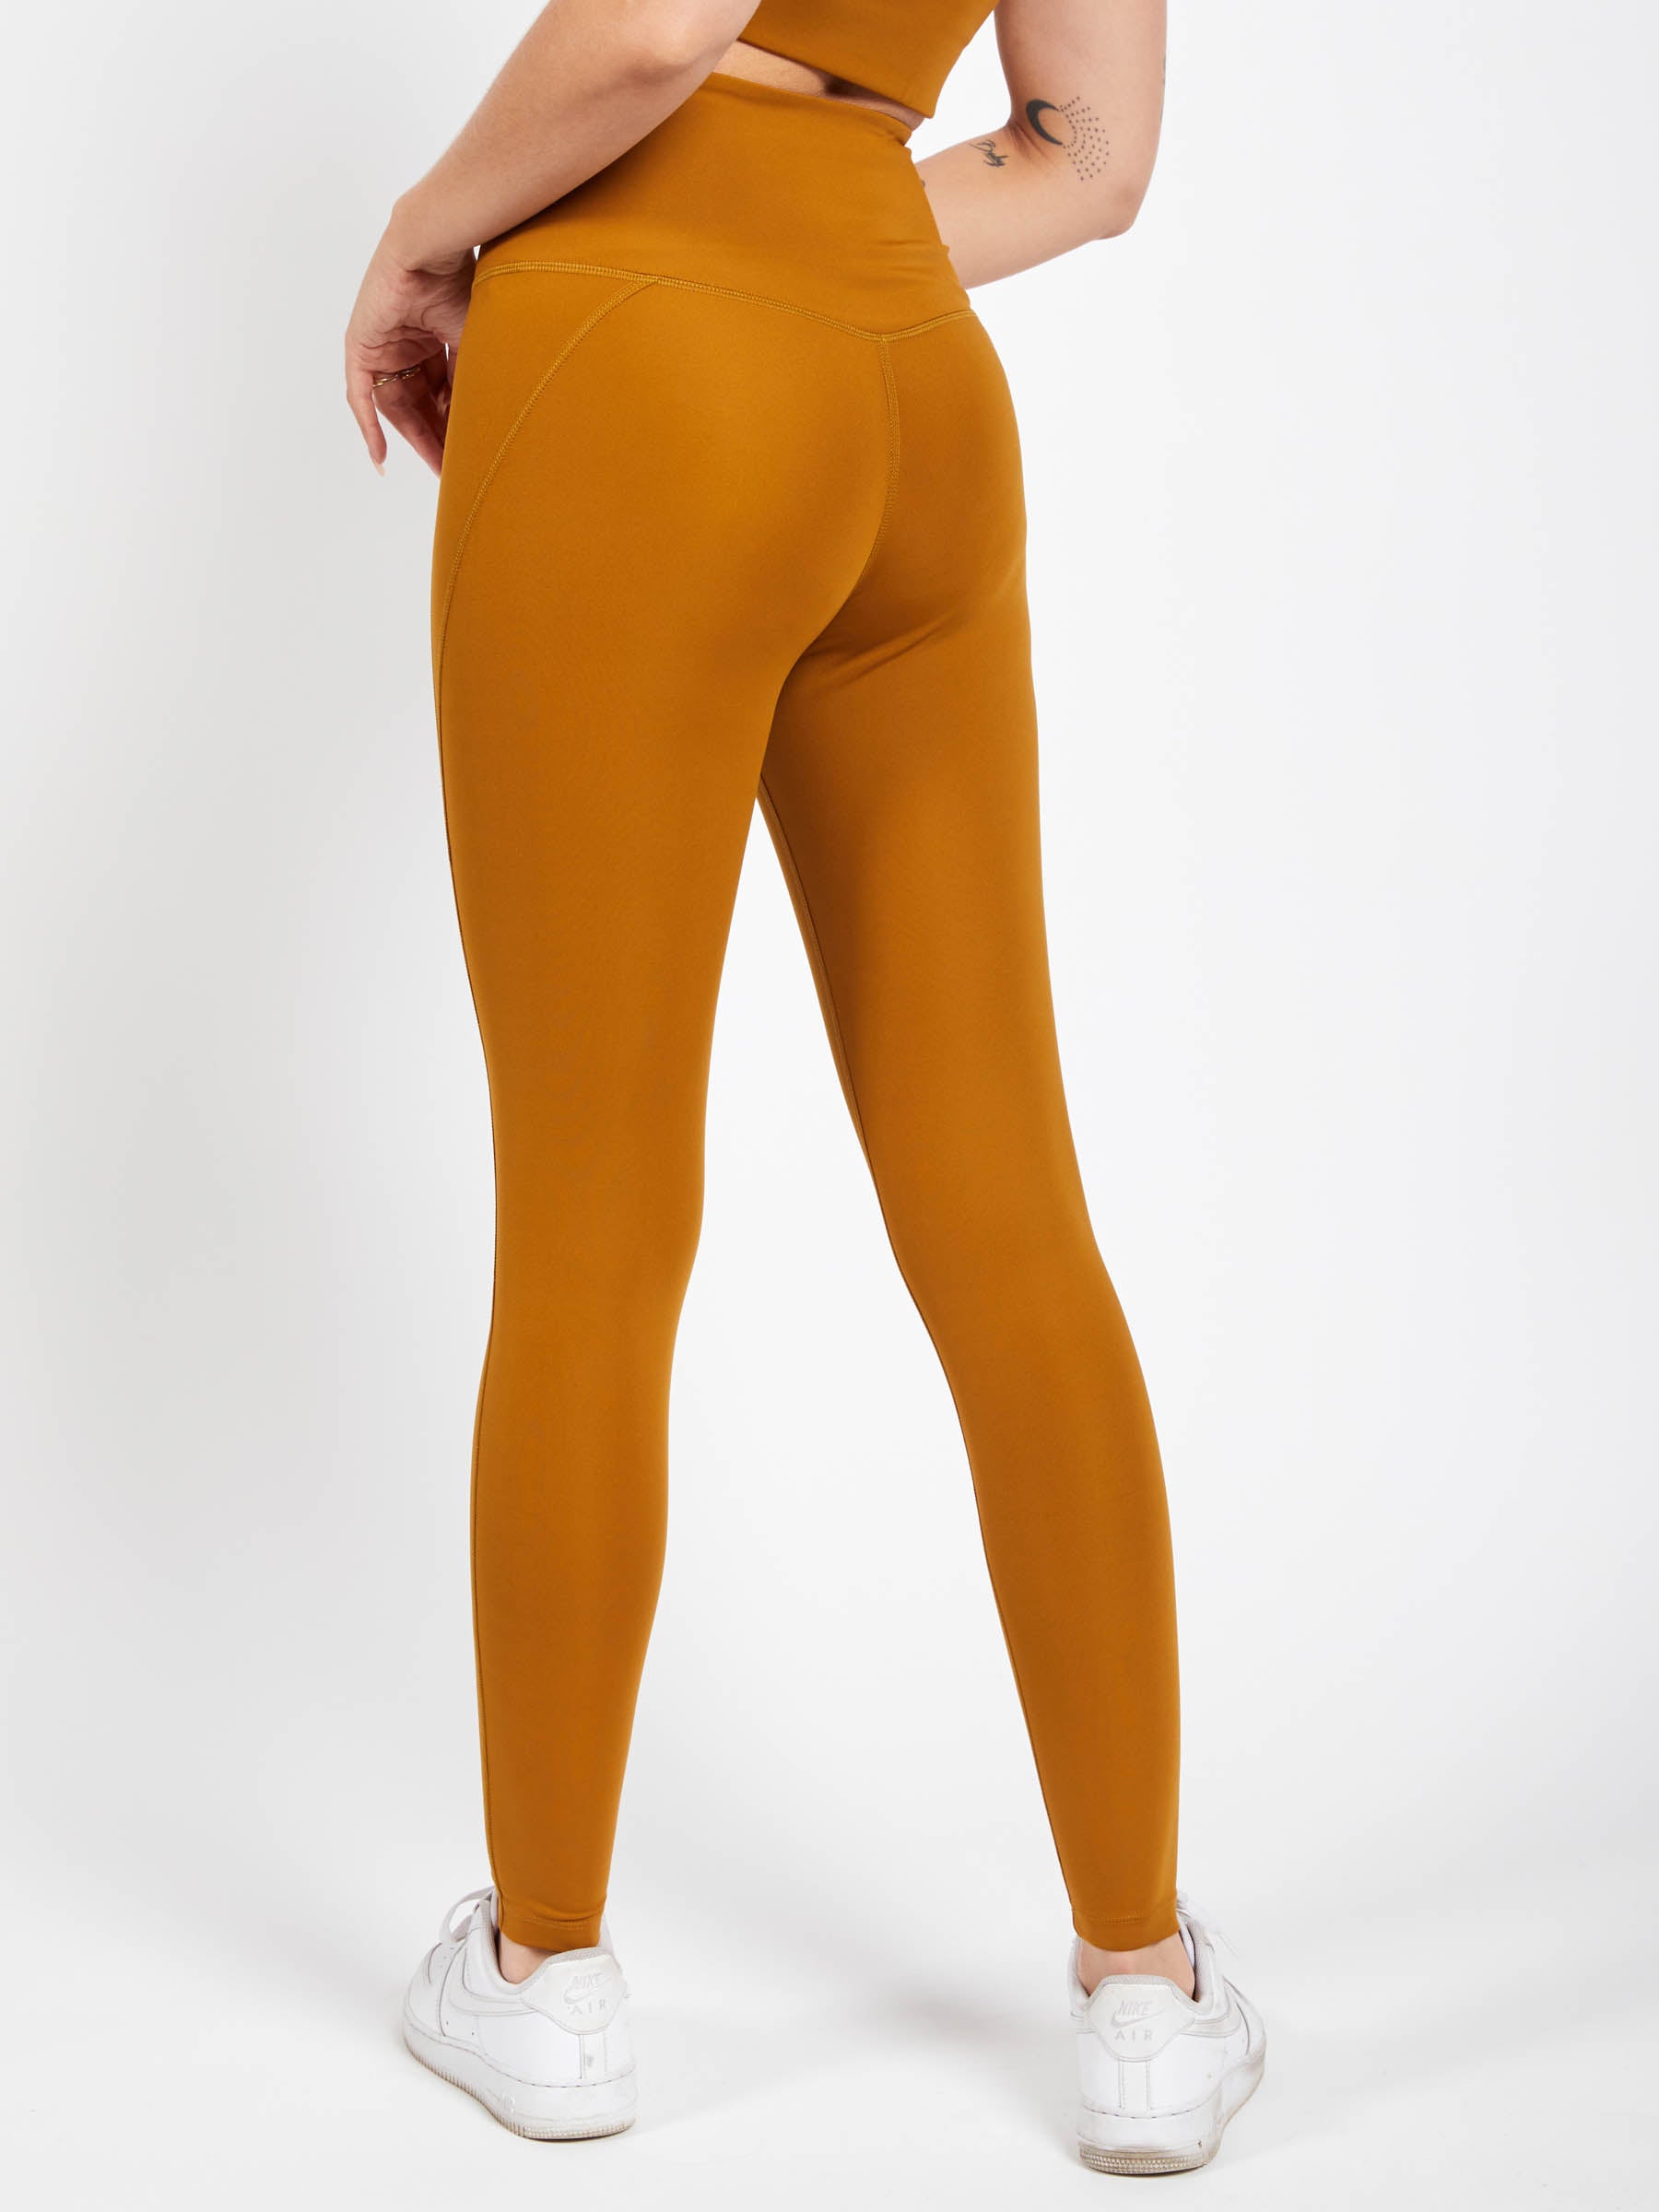 Sage collective leggings - areagross